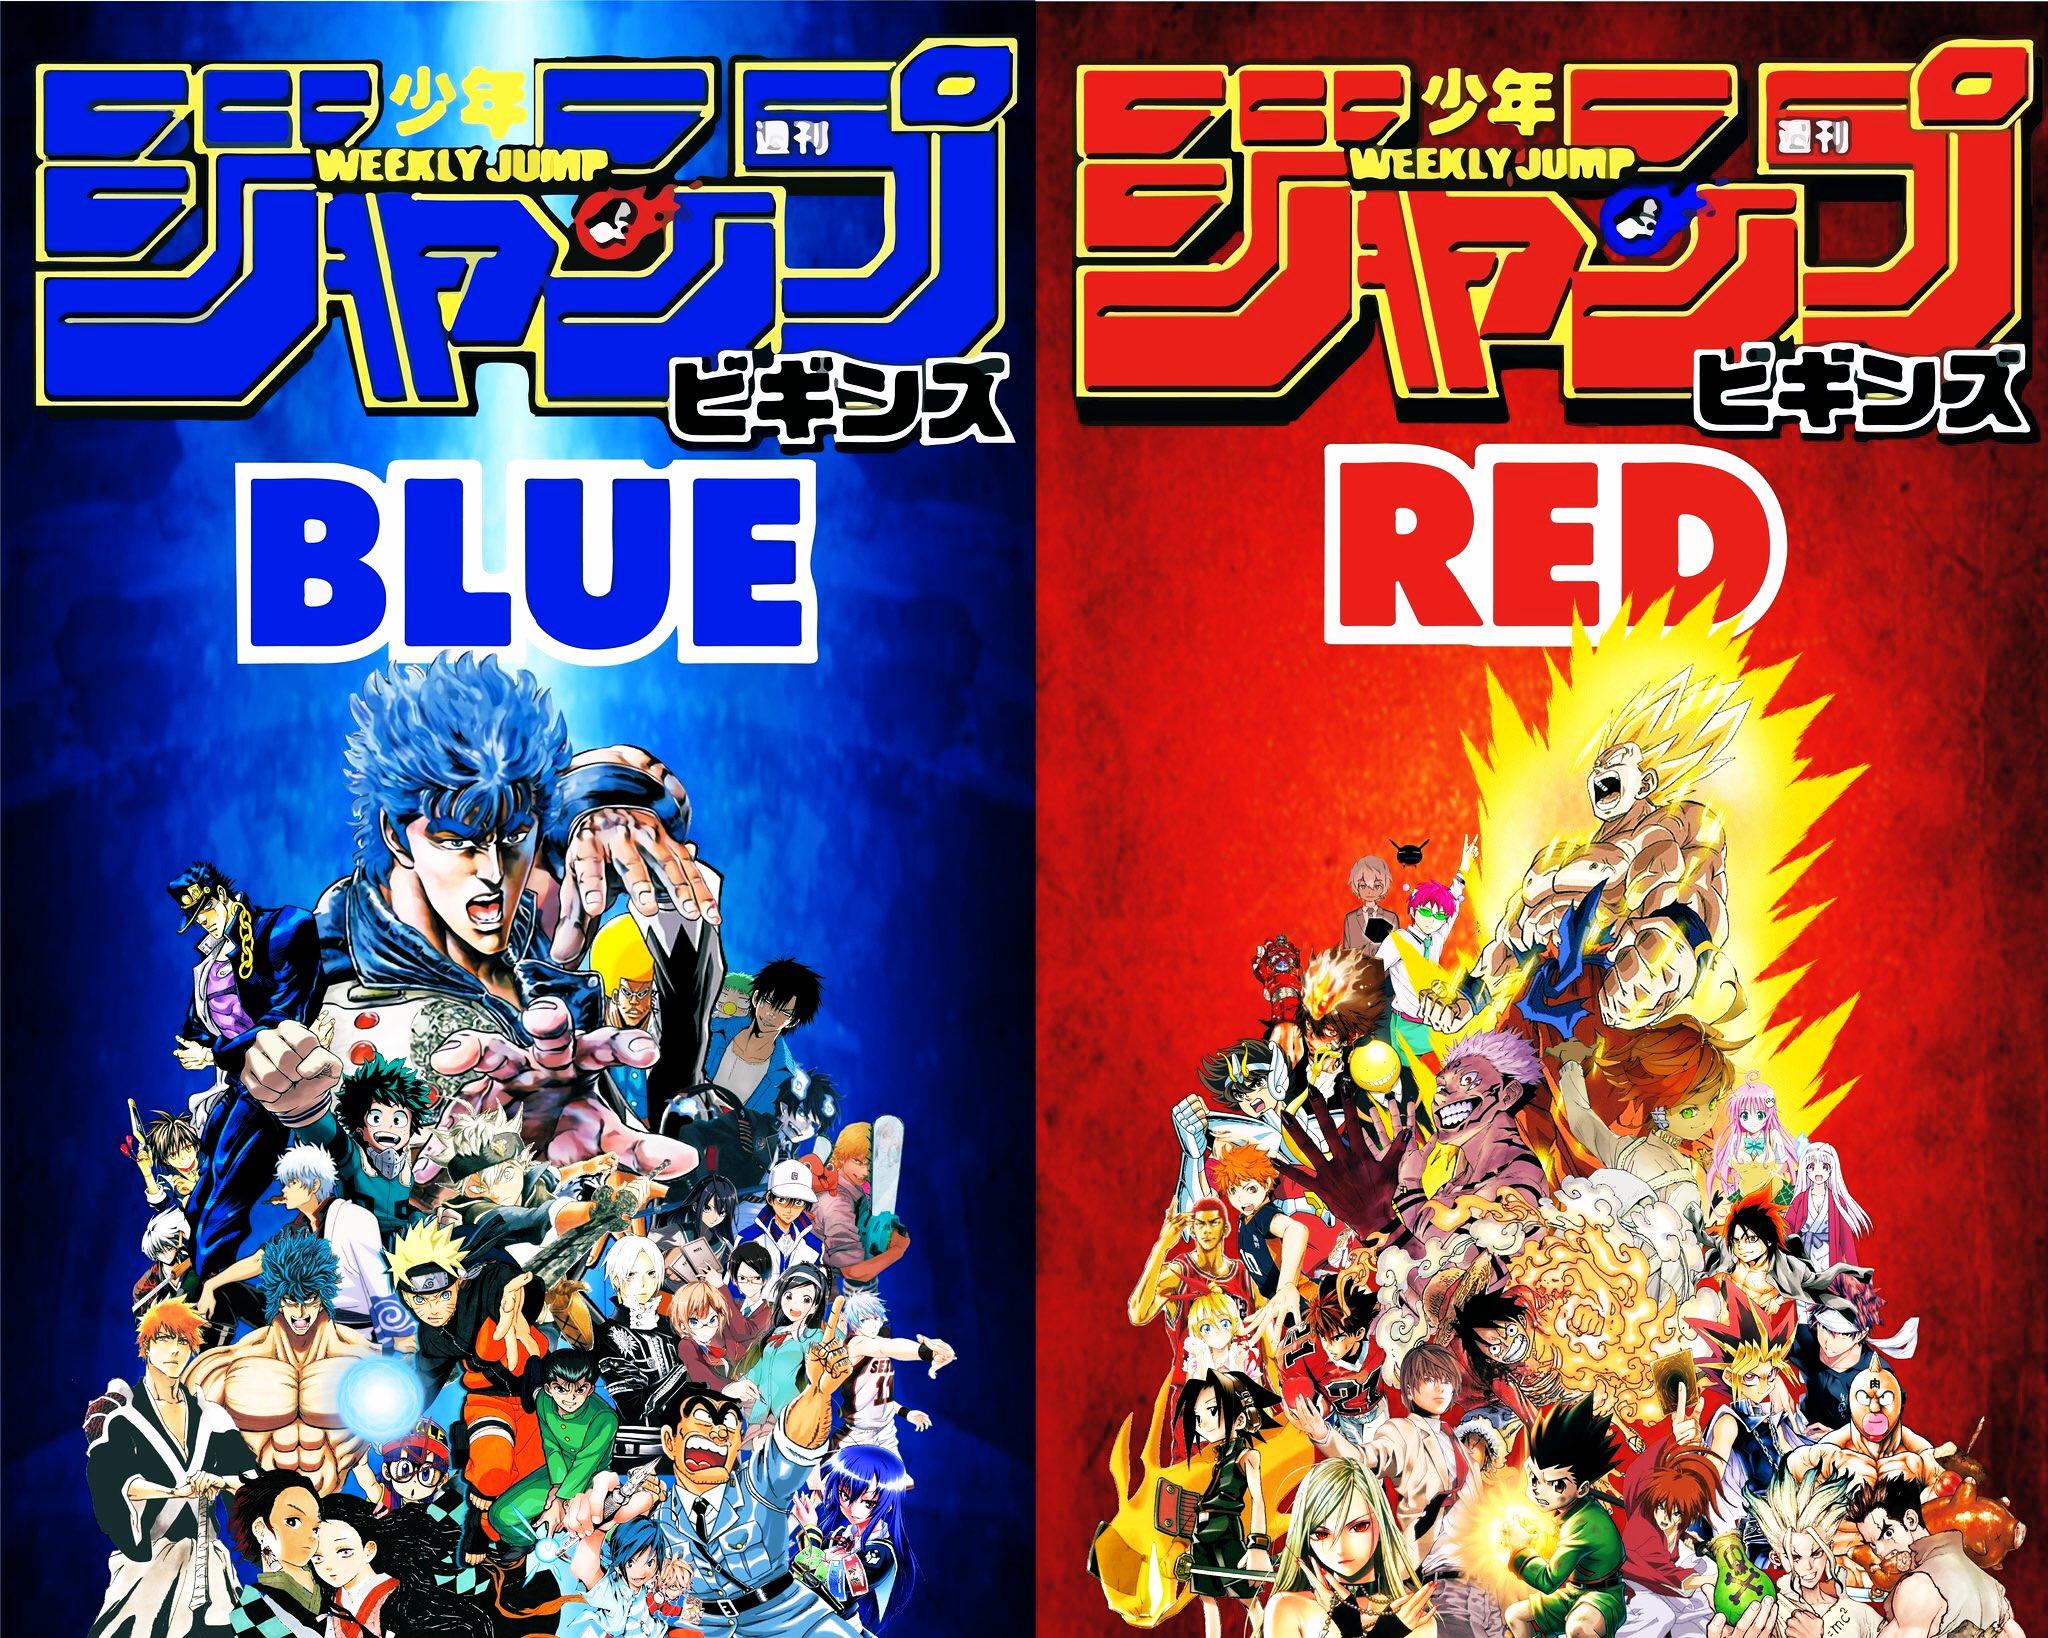 Red or Blue - and why? (shounen anime teams) - Forums 